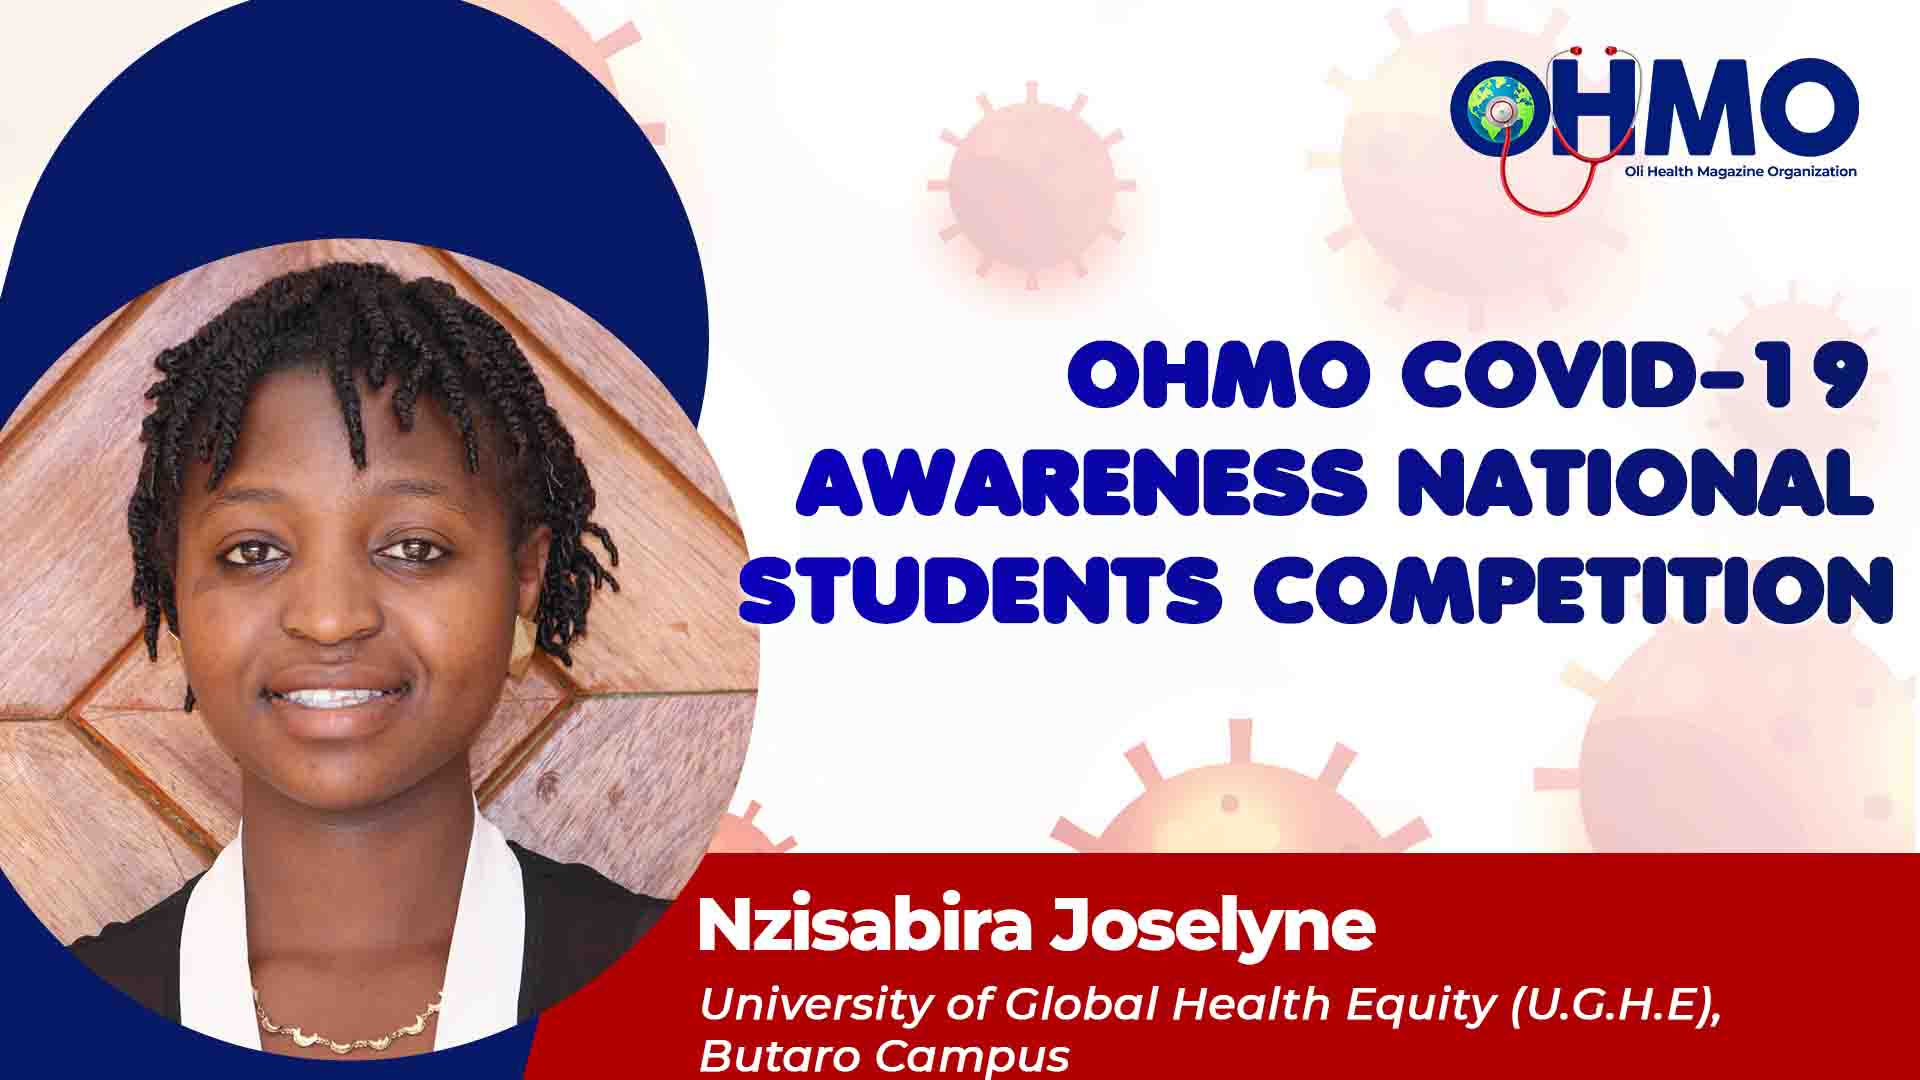 Mental Health Crisis during COVID-19: A Voice of Medical Practitioners to Be Heard - Nzisabira Joselyne from UGHE (ENTRY 38)